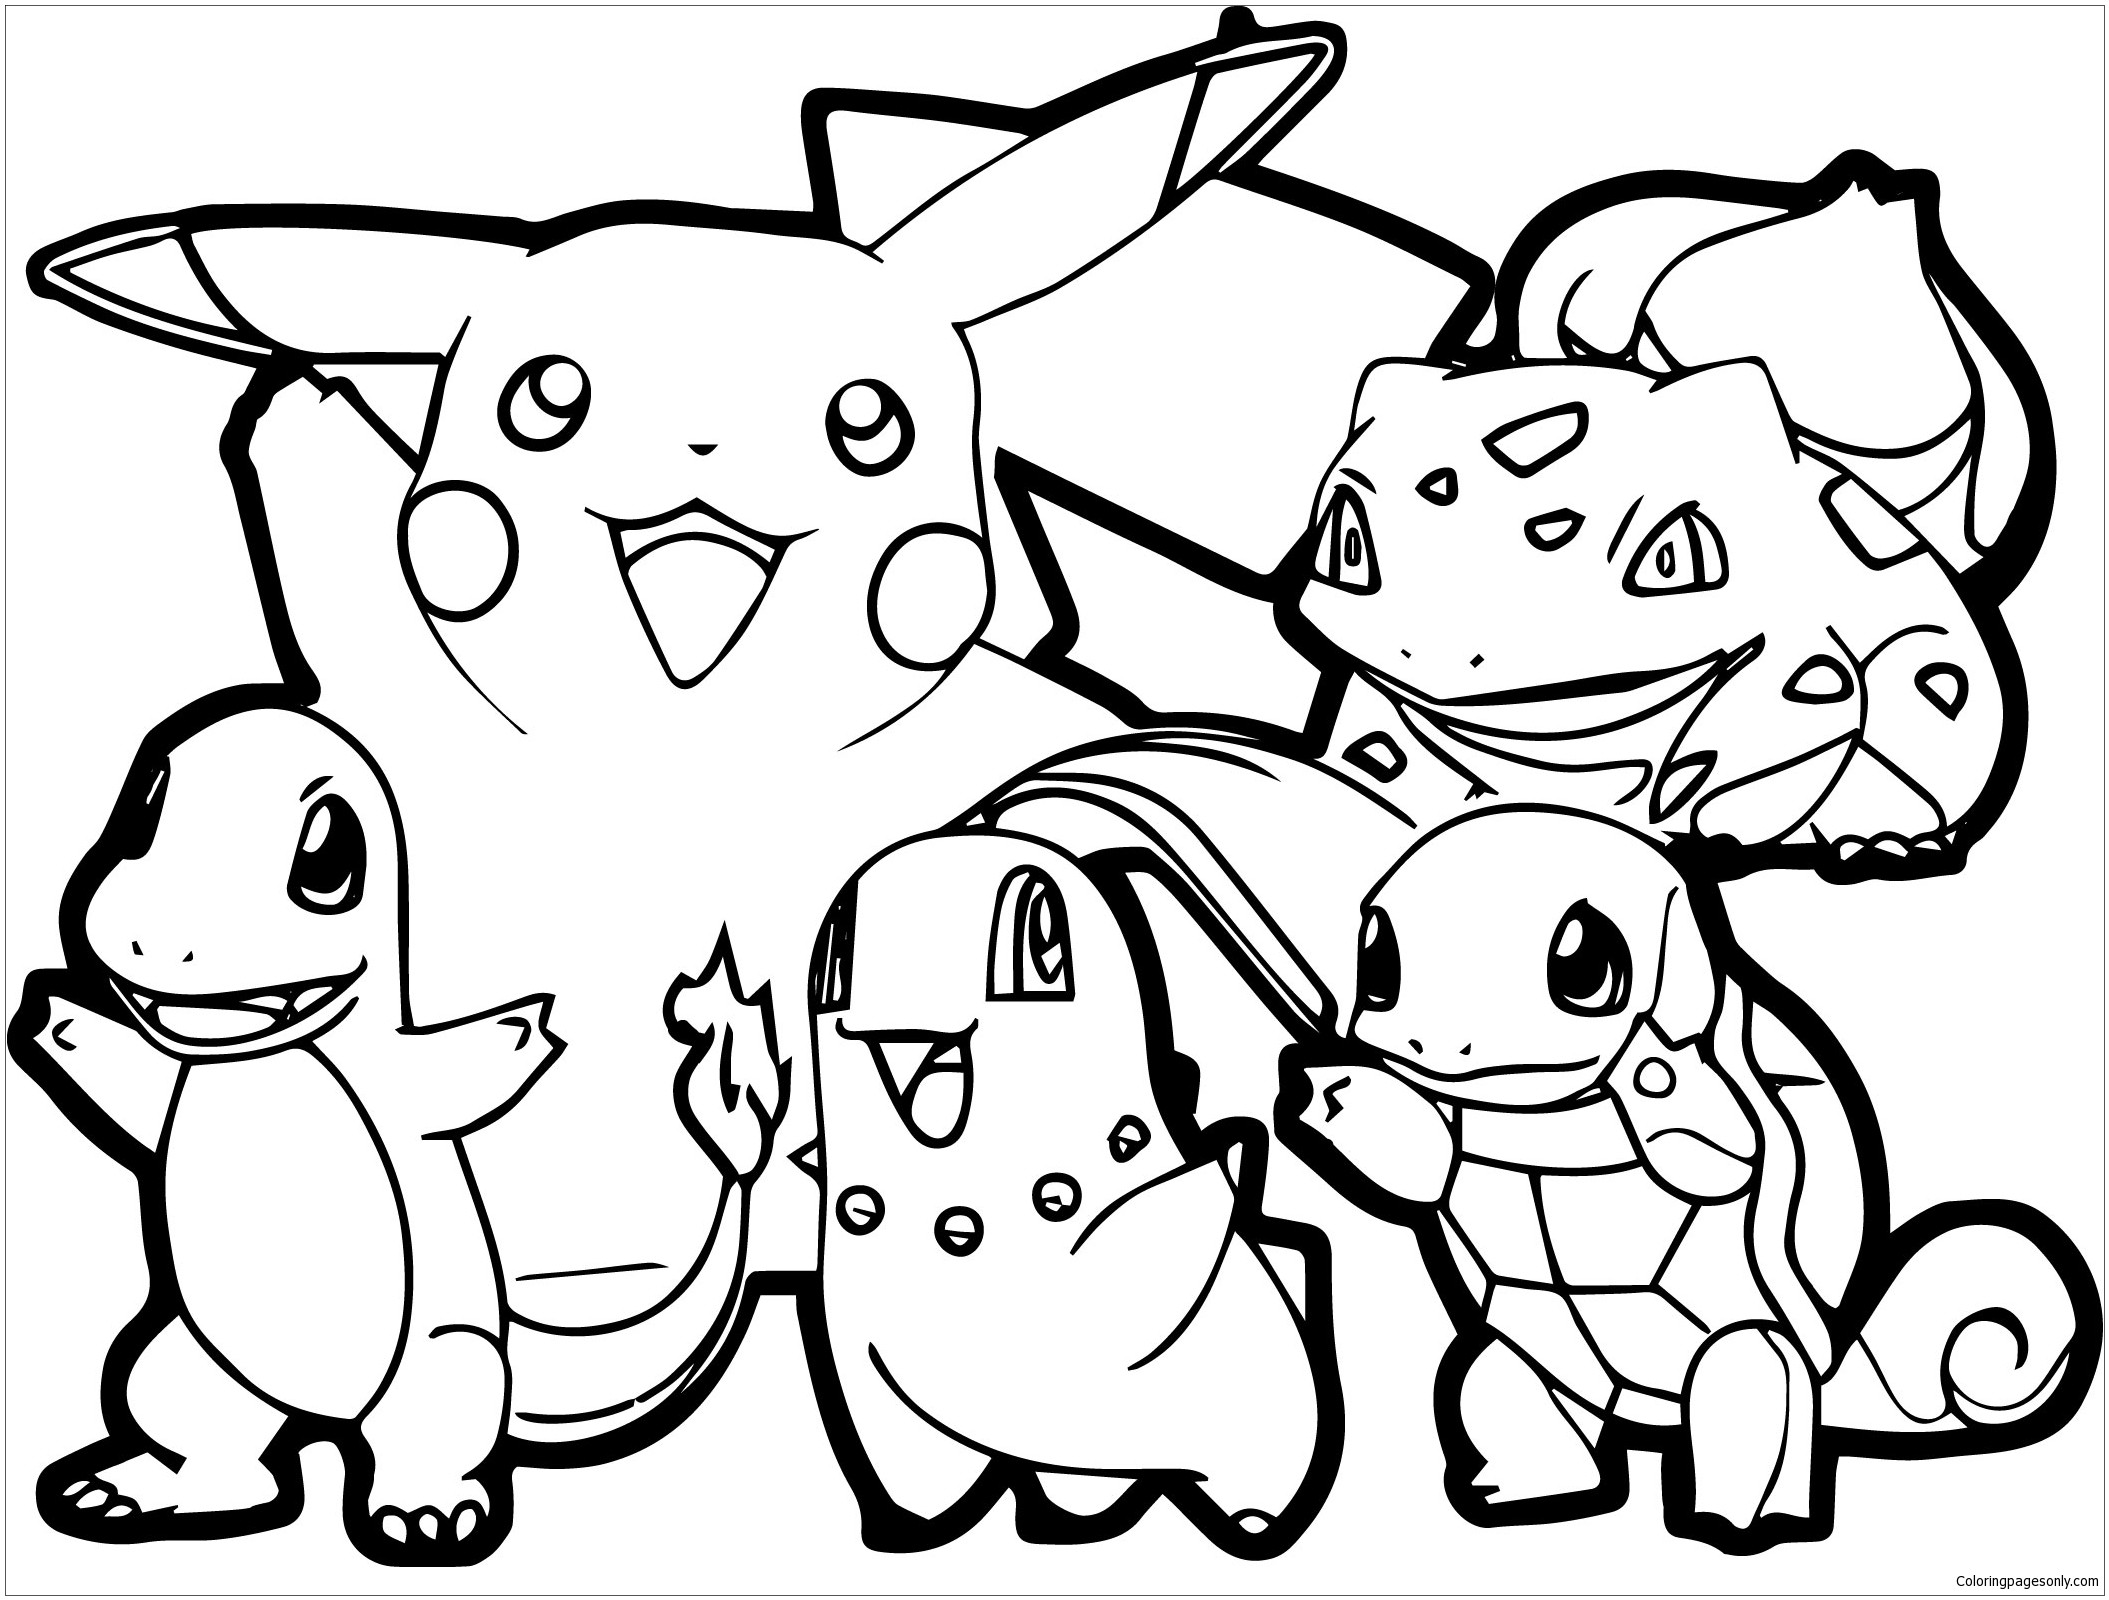 Pokemon Coloring Pages For Kids
 Adult Pokemon Coloring Page Free Coloring Pages line